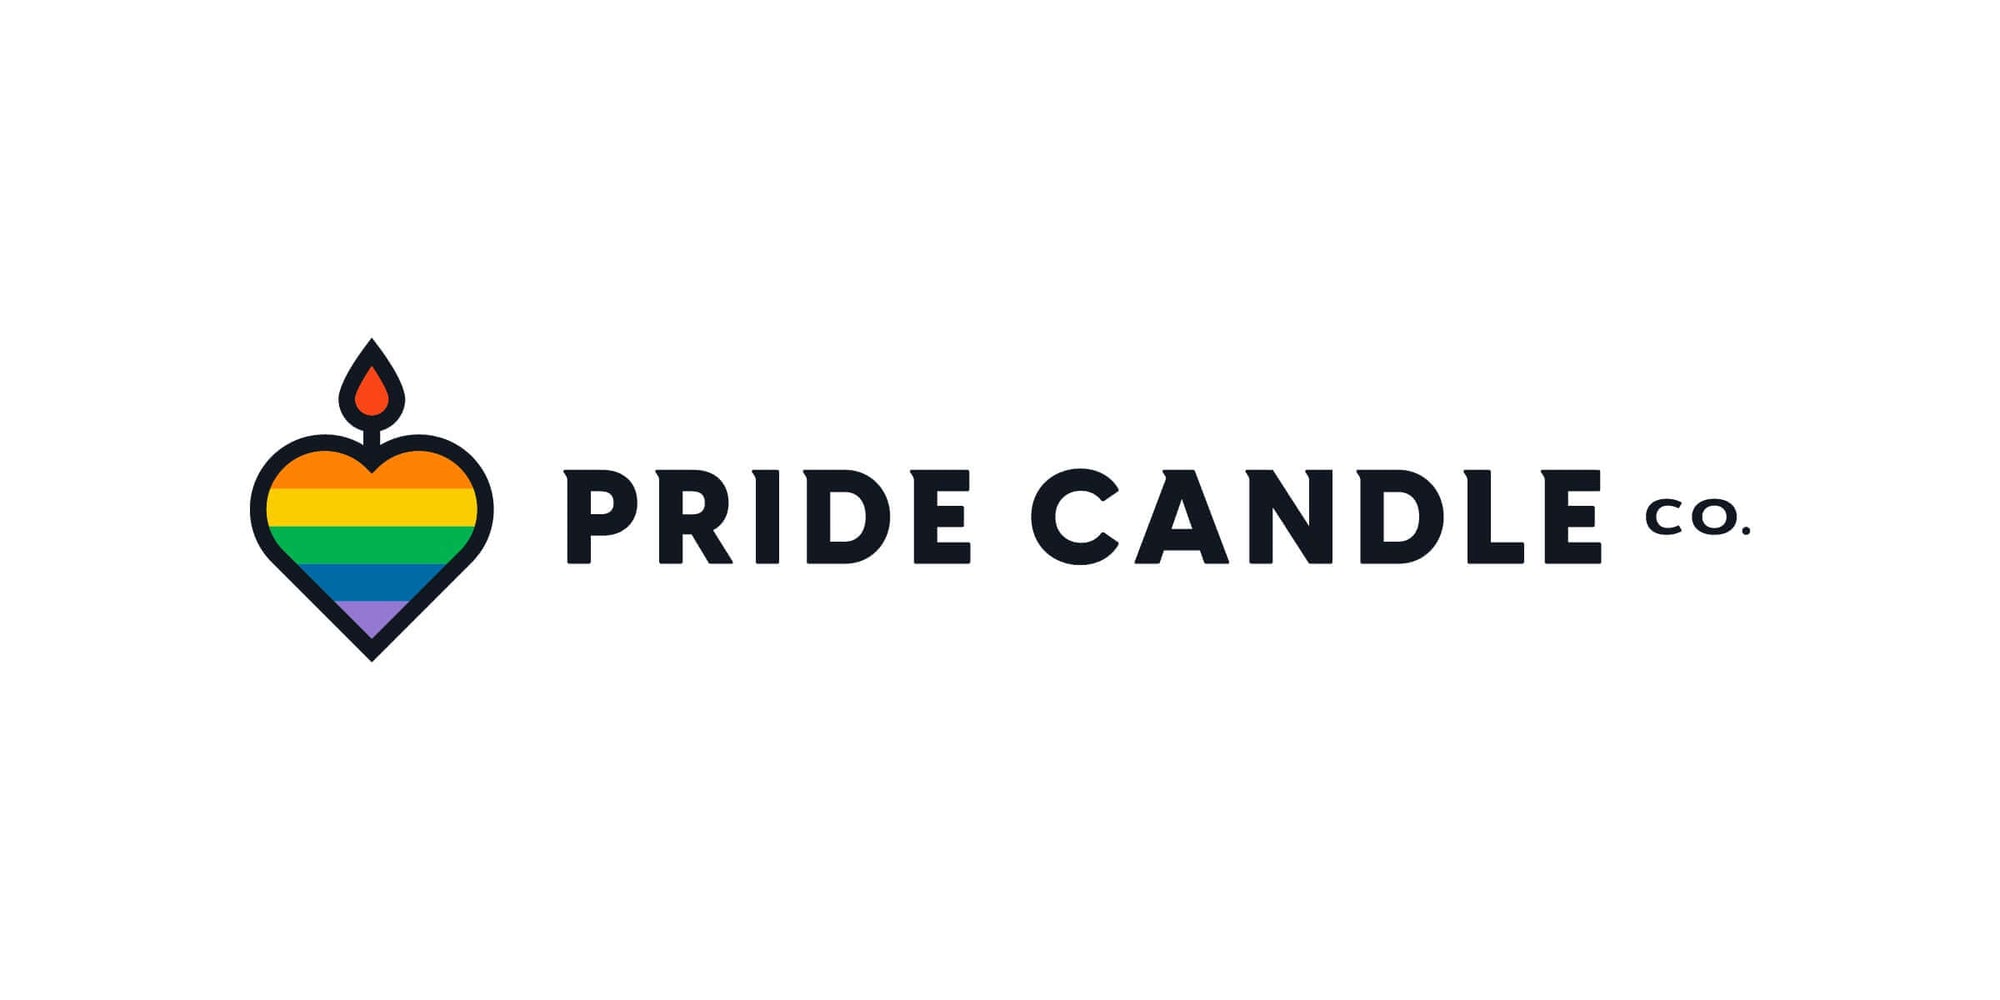 image of pride candle company logo with a rainbow heart on the left with a small flame above, and the company name in black on the left.